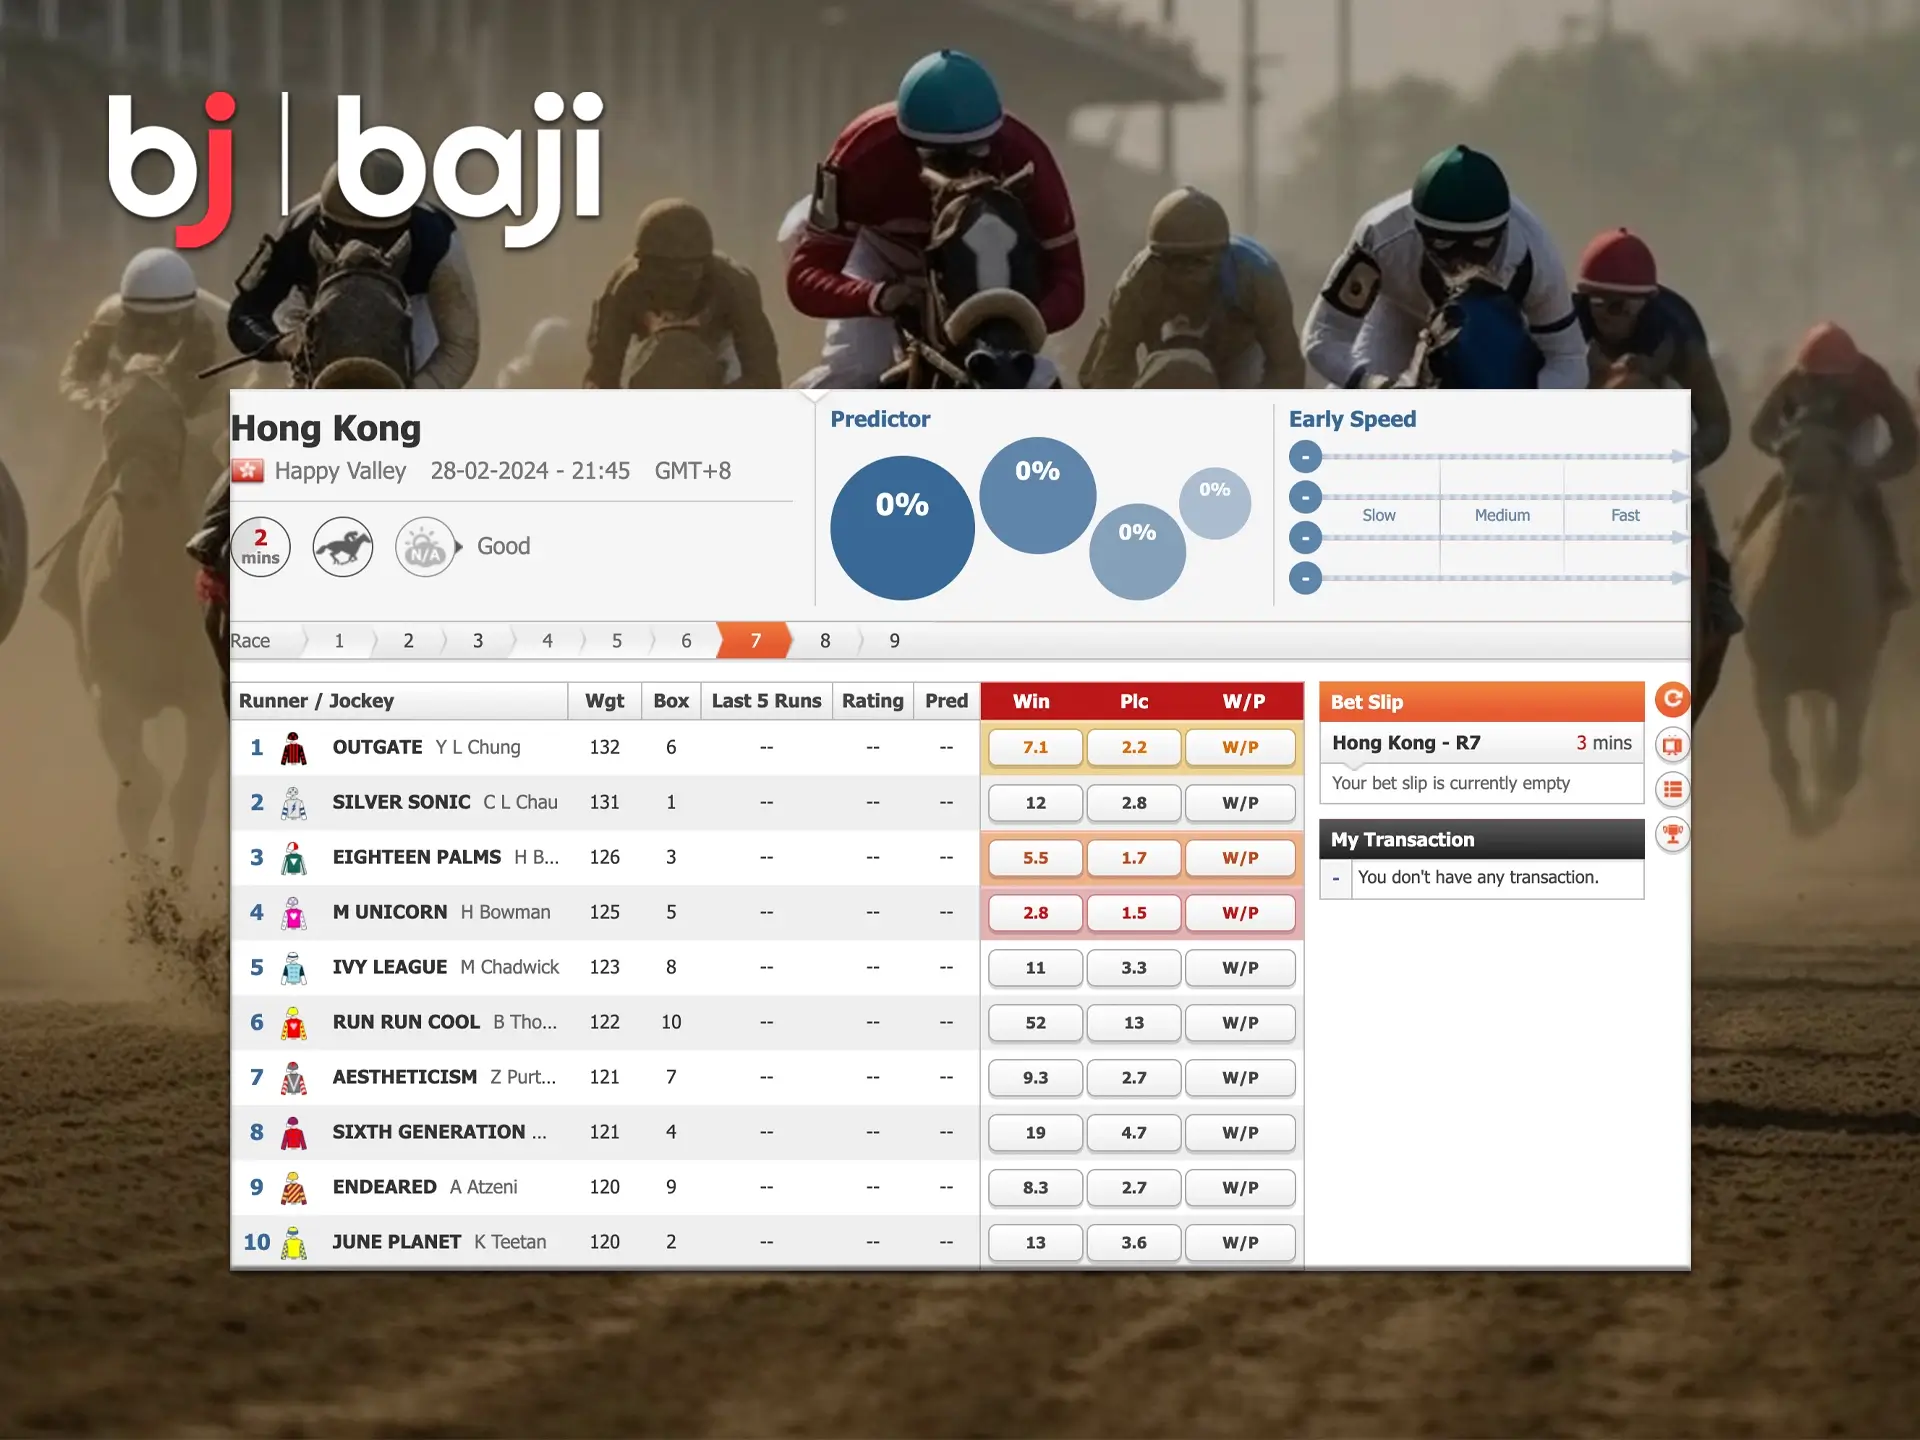 Baji offers users the unique opportunity to bet on horse racing through HorseBook.